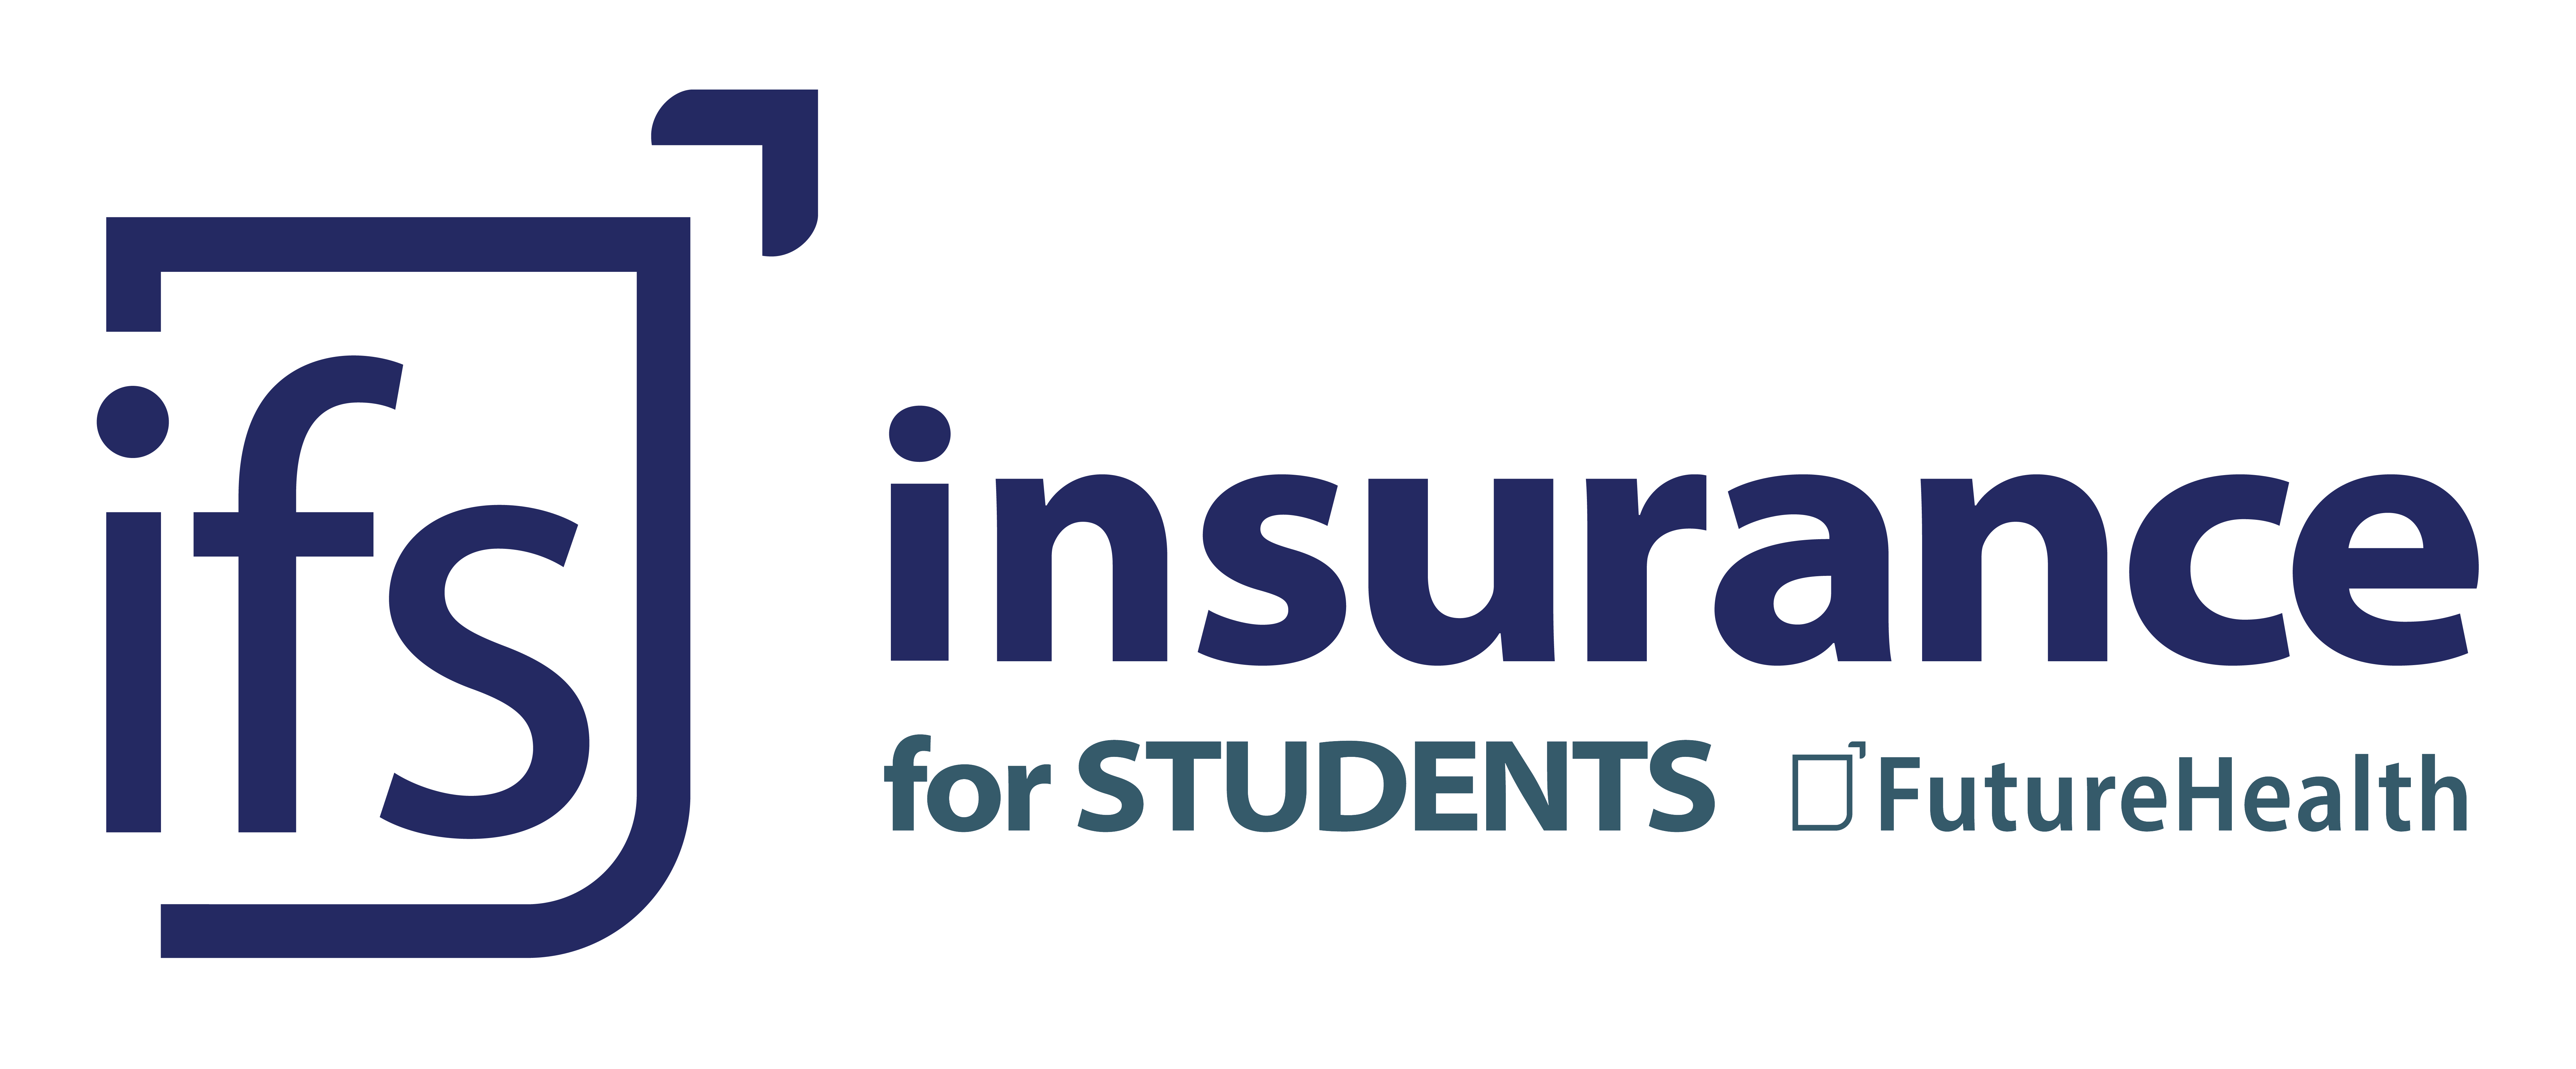 Insurance For Students, Inc